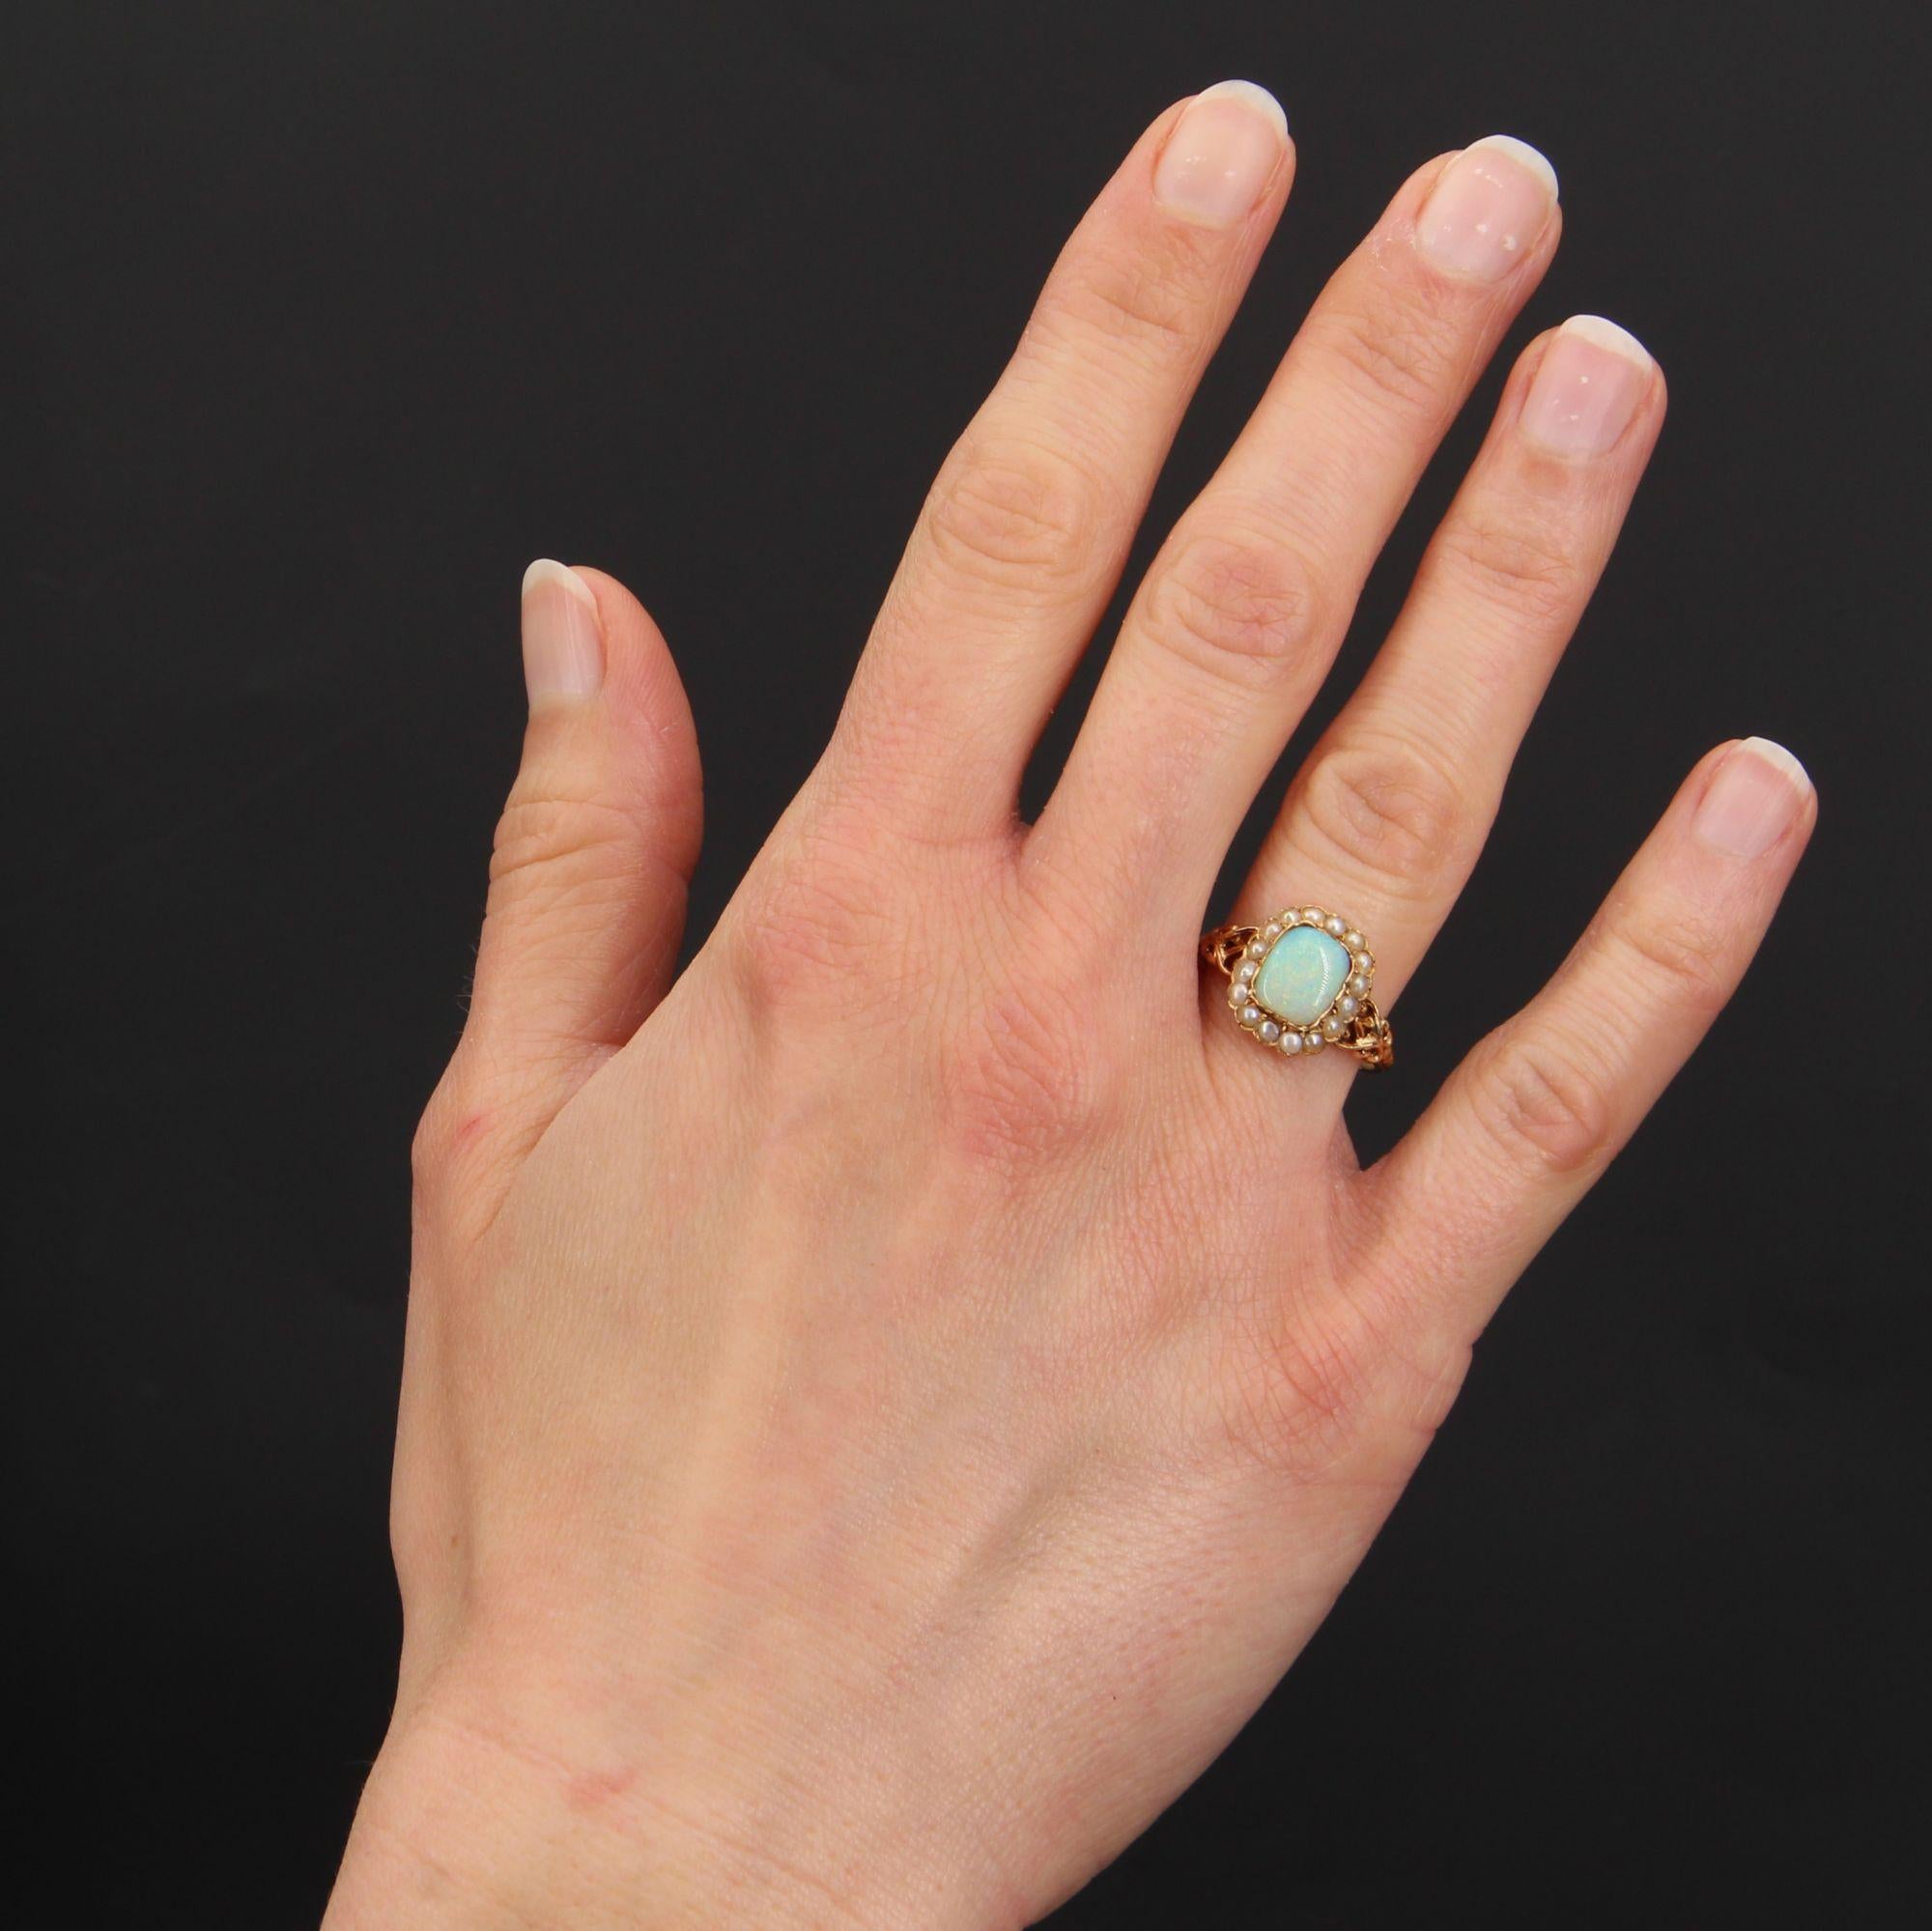 Ring in 18 karat yellow gold, owl hallmark.
Feminine antique ring, it is decorated in the center of an opal cabochon in a surround of natural half pearls. The setting is delicately openwork chiseled to the base of the ring.
Weight of the opal : 0.79